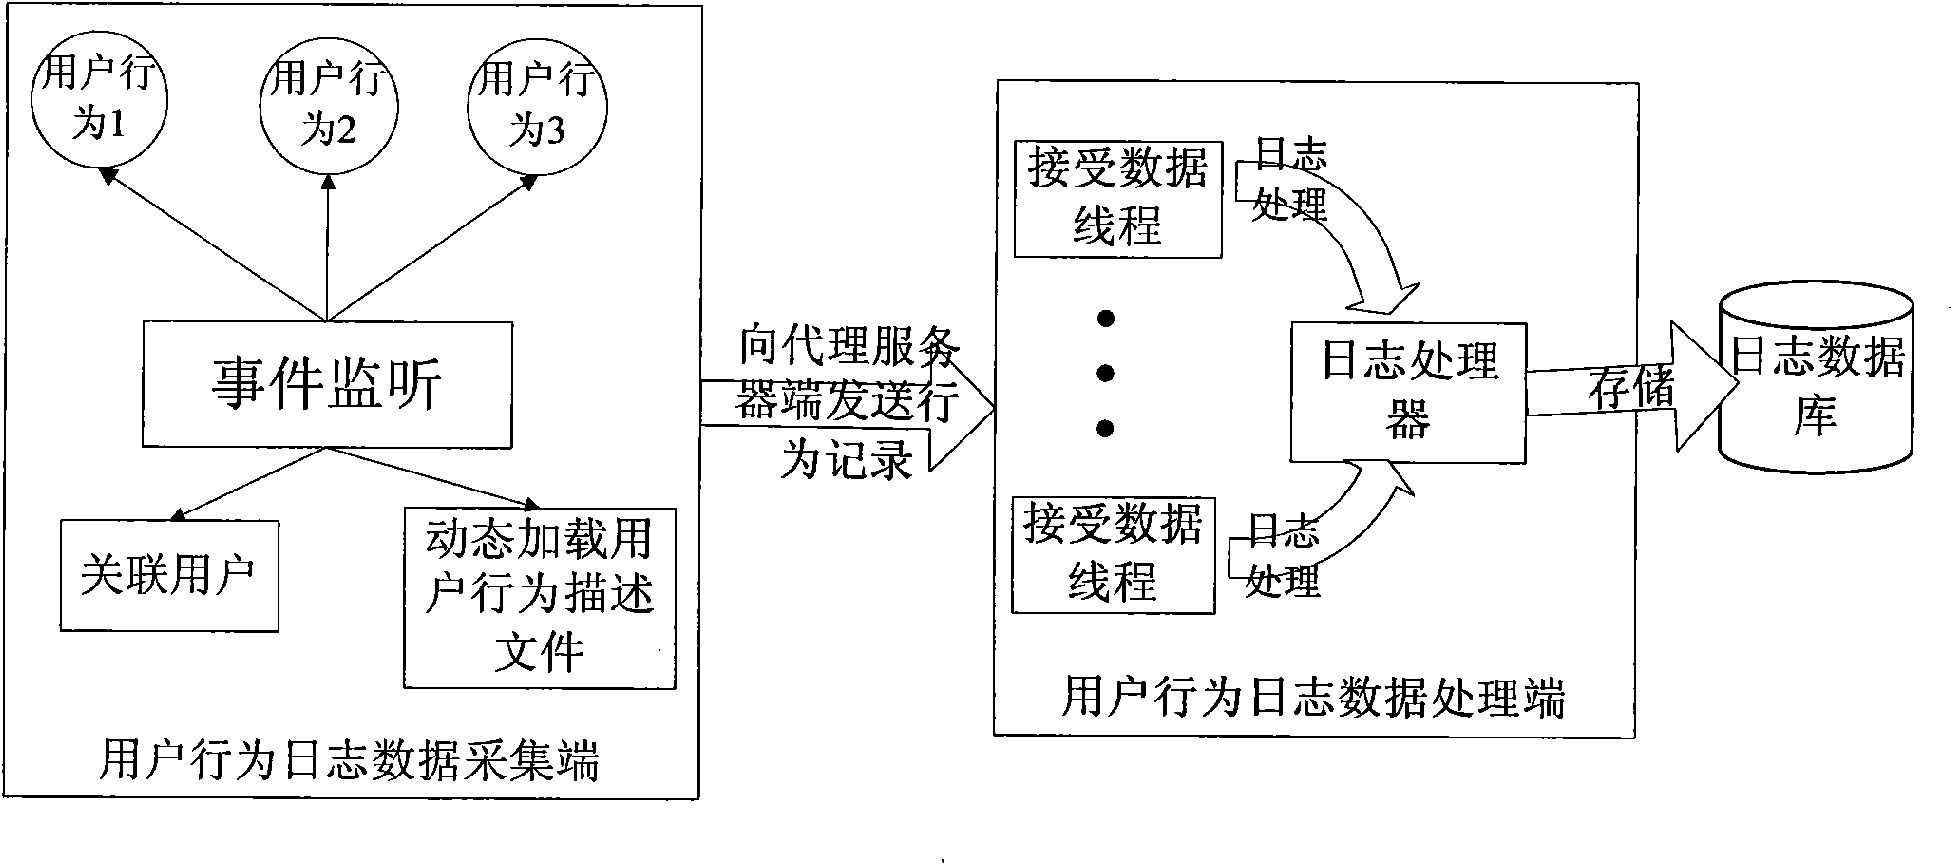 Method for automatically acquiring user behavior log of network